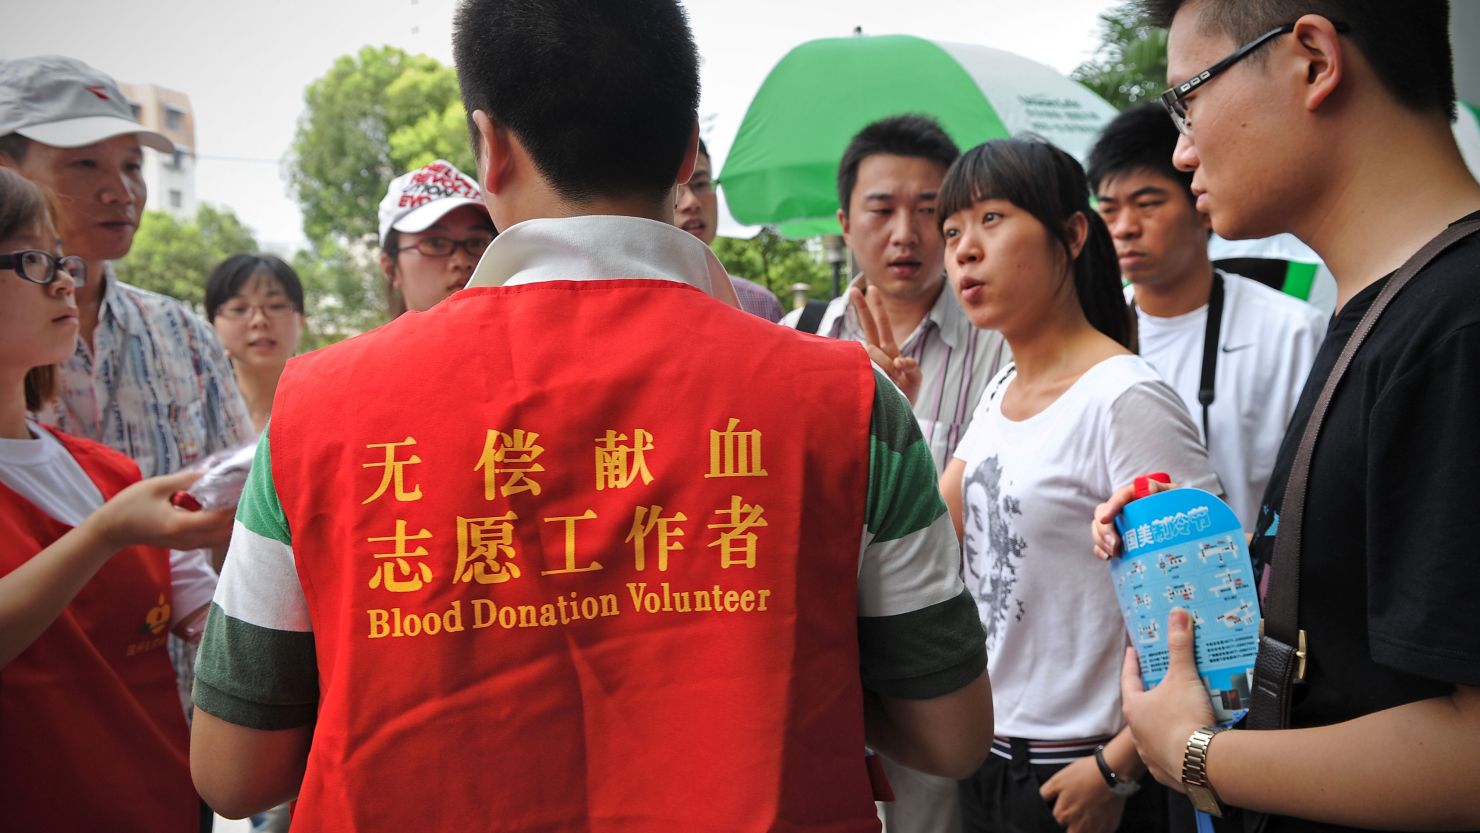 As of July 1, lesbians in China are allowed to donate blood after a 1998 ban was amended.